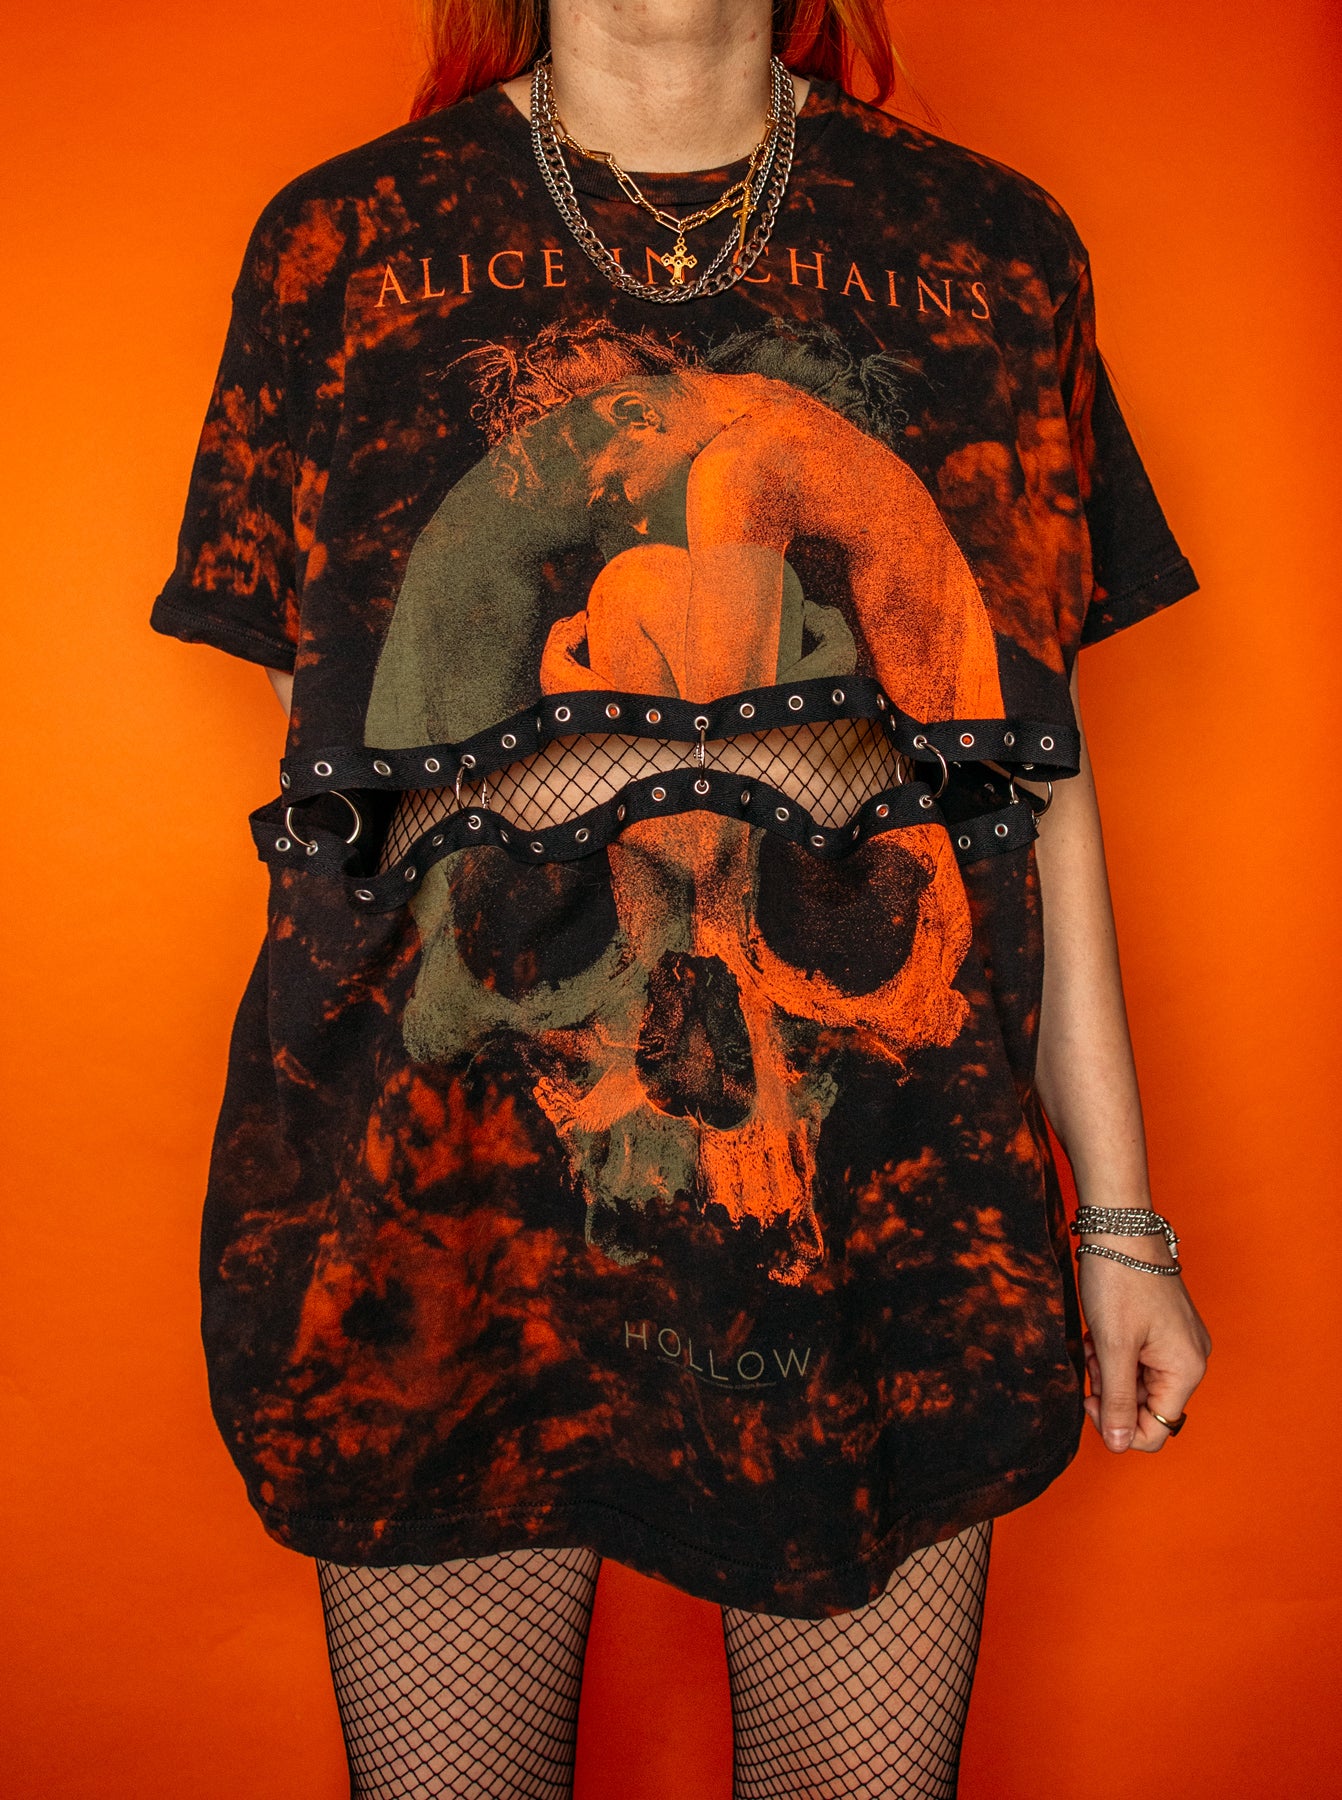 Alice In Chains Tee